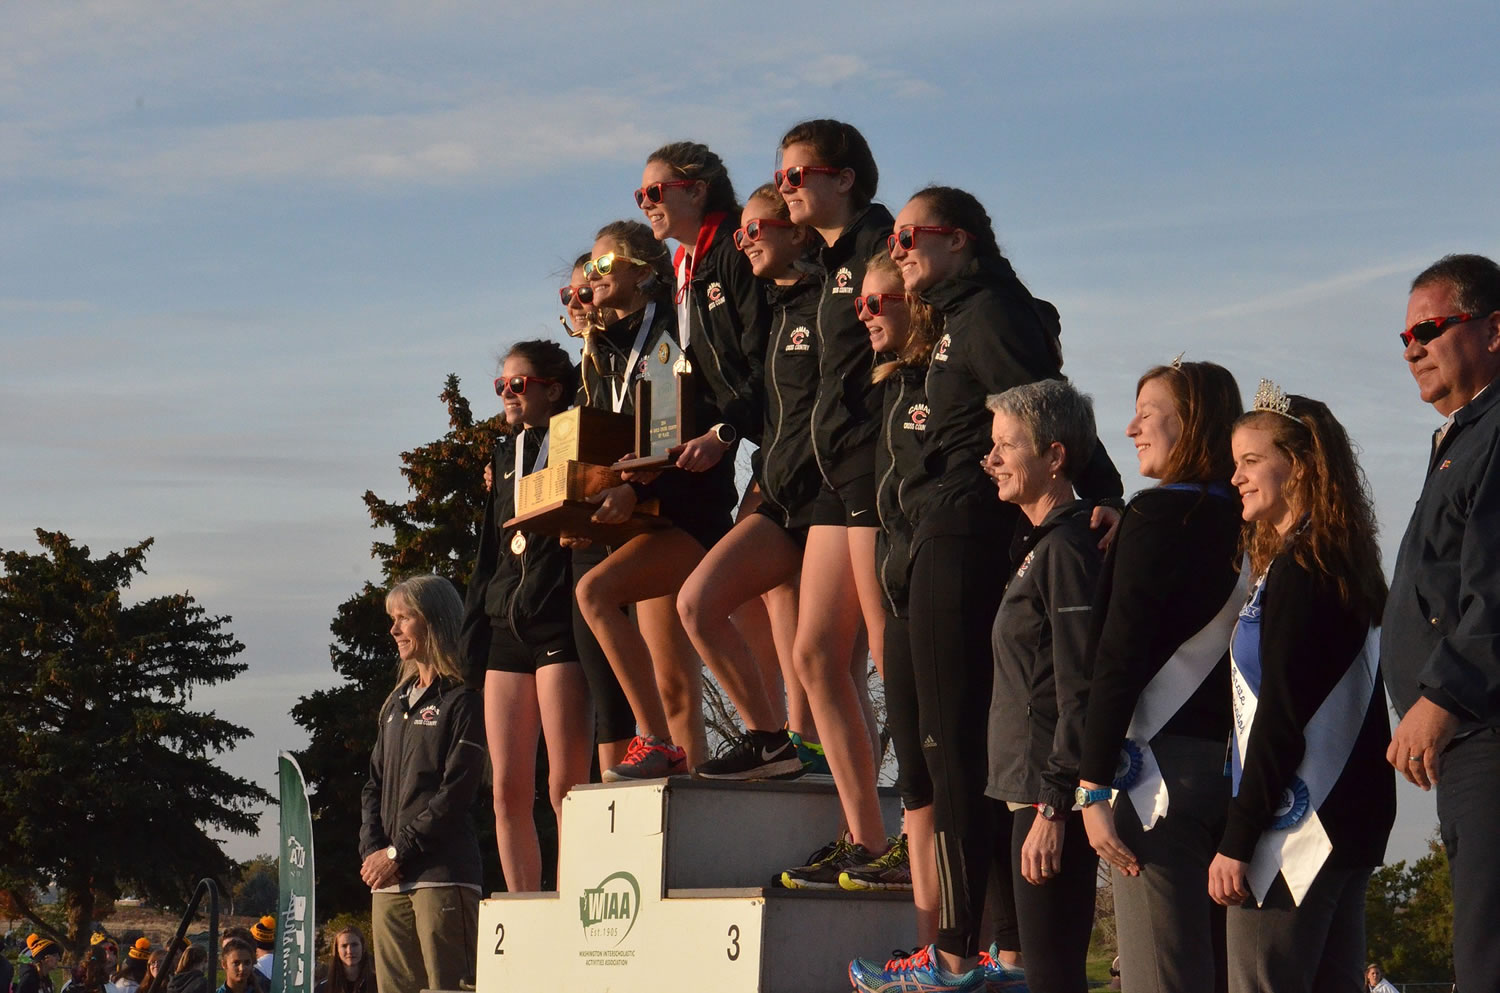 The Camas girls cross country team atop the podium after winning the Class 4A state championship Saturday.